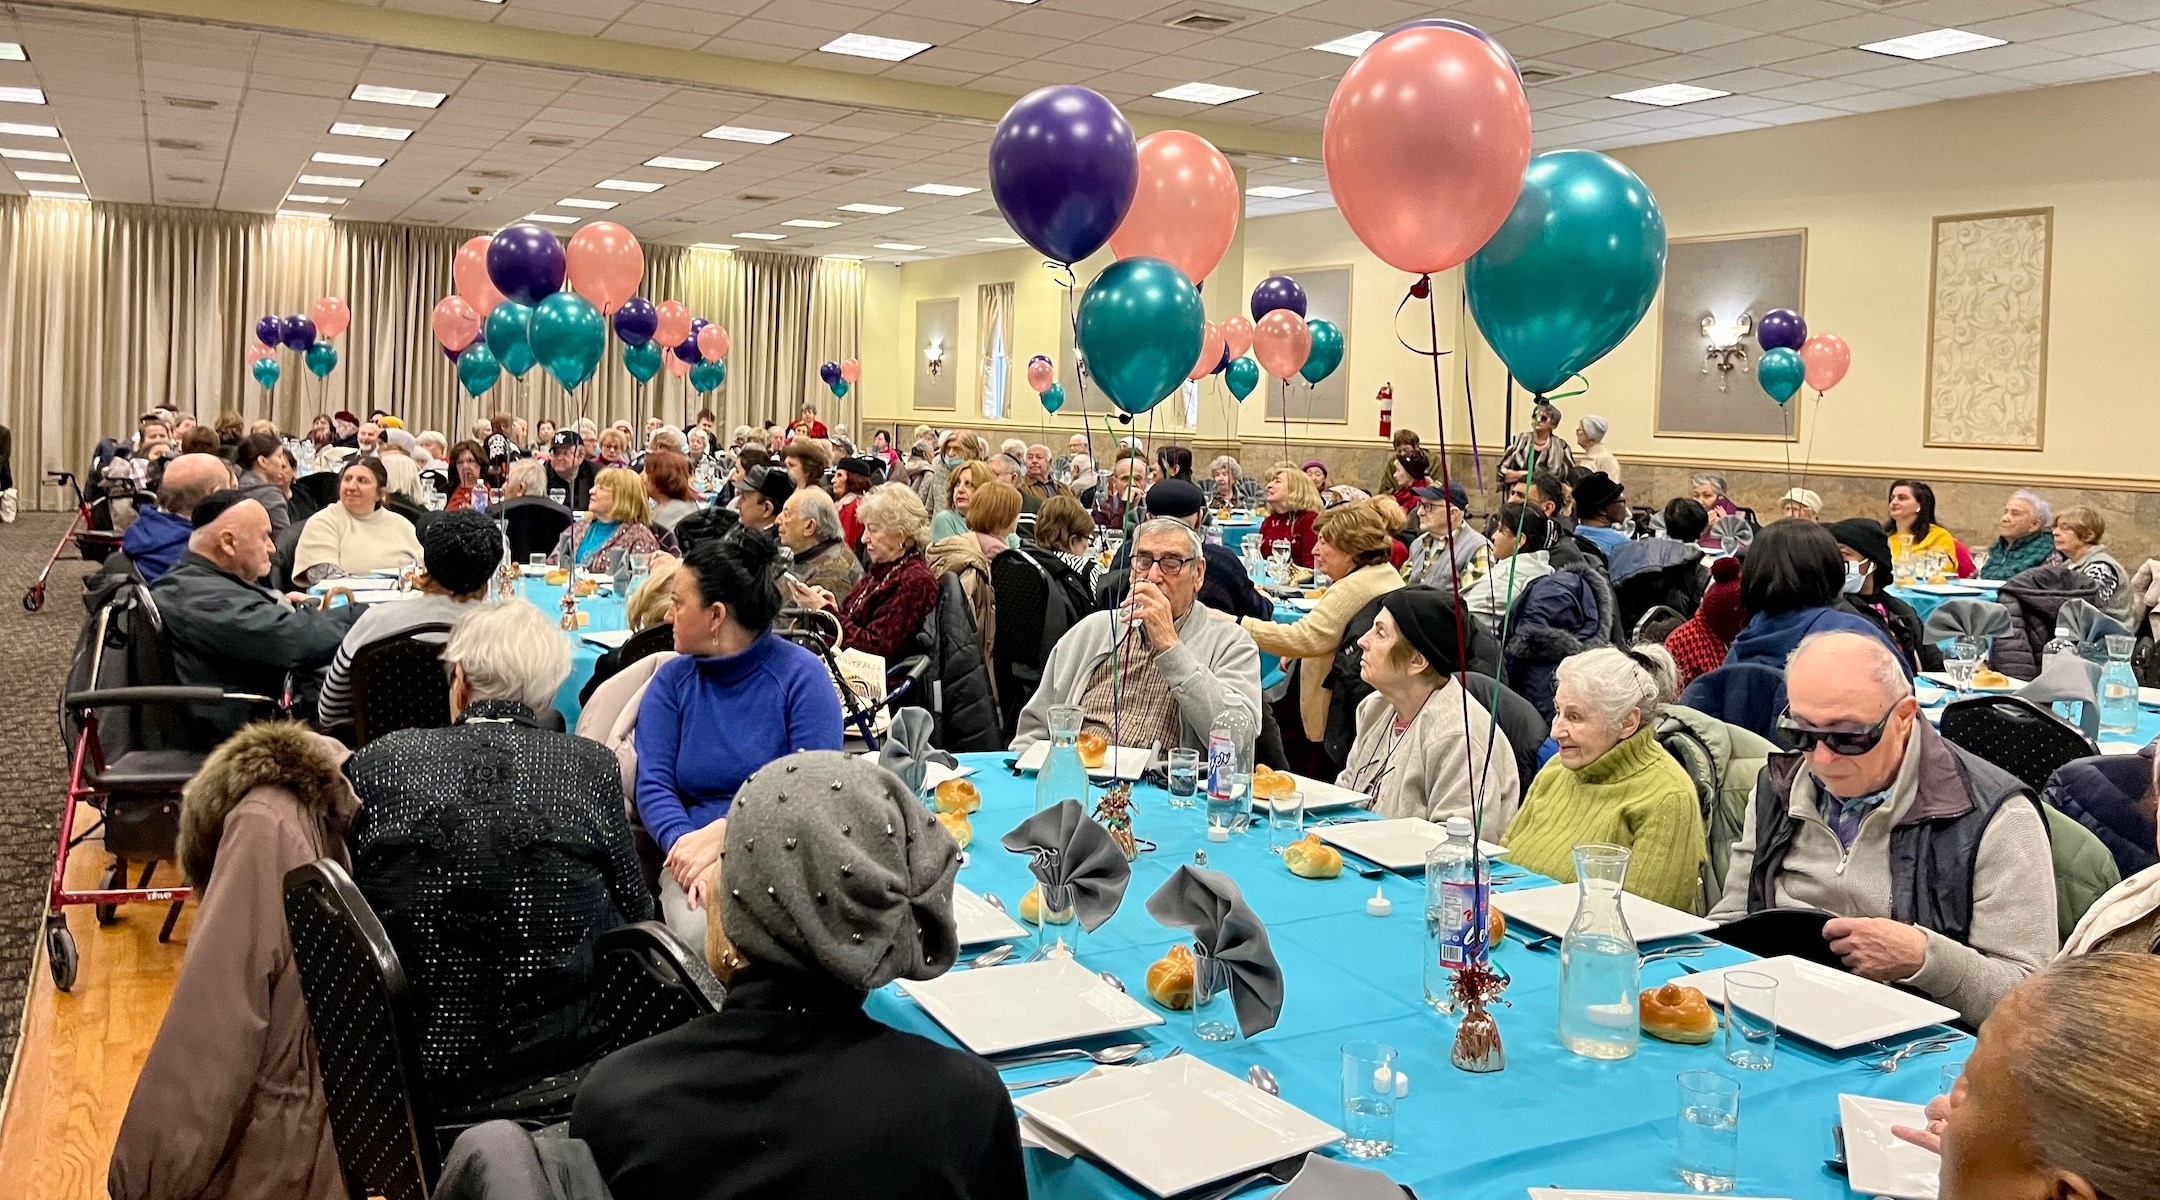 “Club 2600” is a monthly gathering in Midwood, Brooklyn for Holocaust survivors, hosted by the Jewish Community Council of Greater Coney Island. (Julia Gergely)